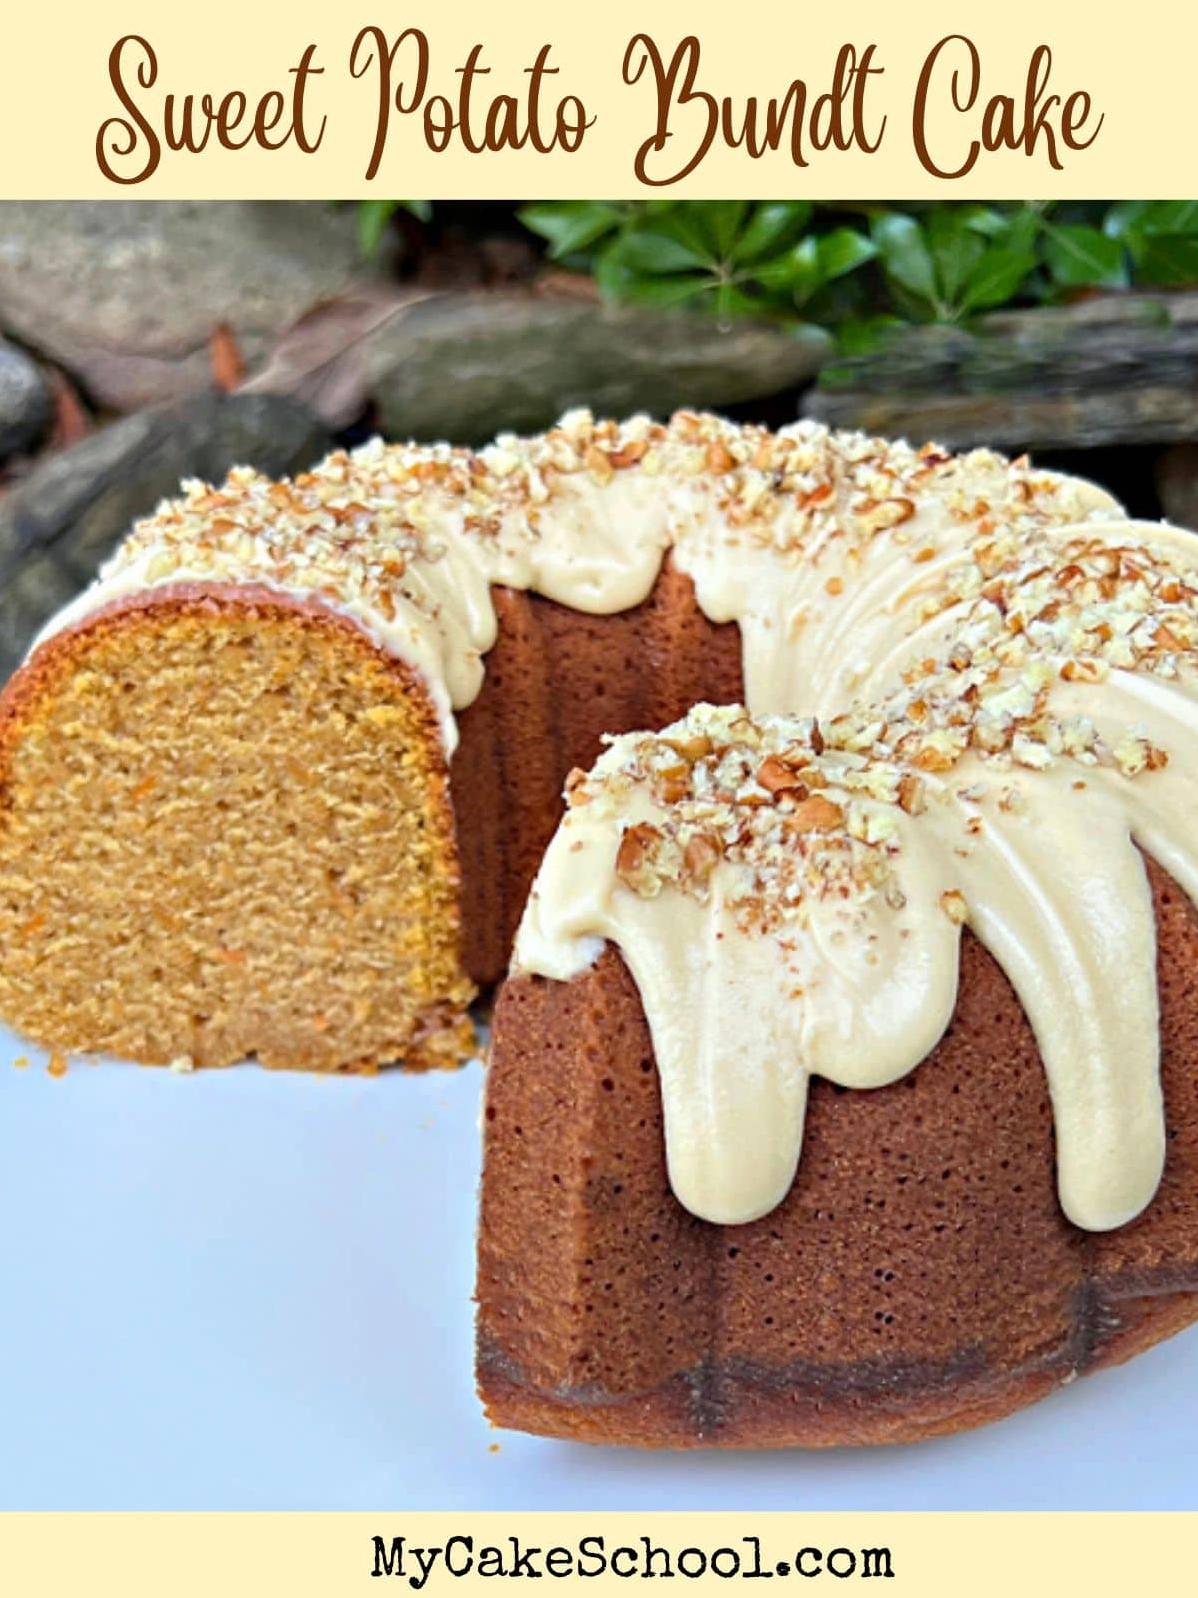  Here's the new definition of comfort food - Sweet Potato Pound Cake.